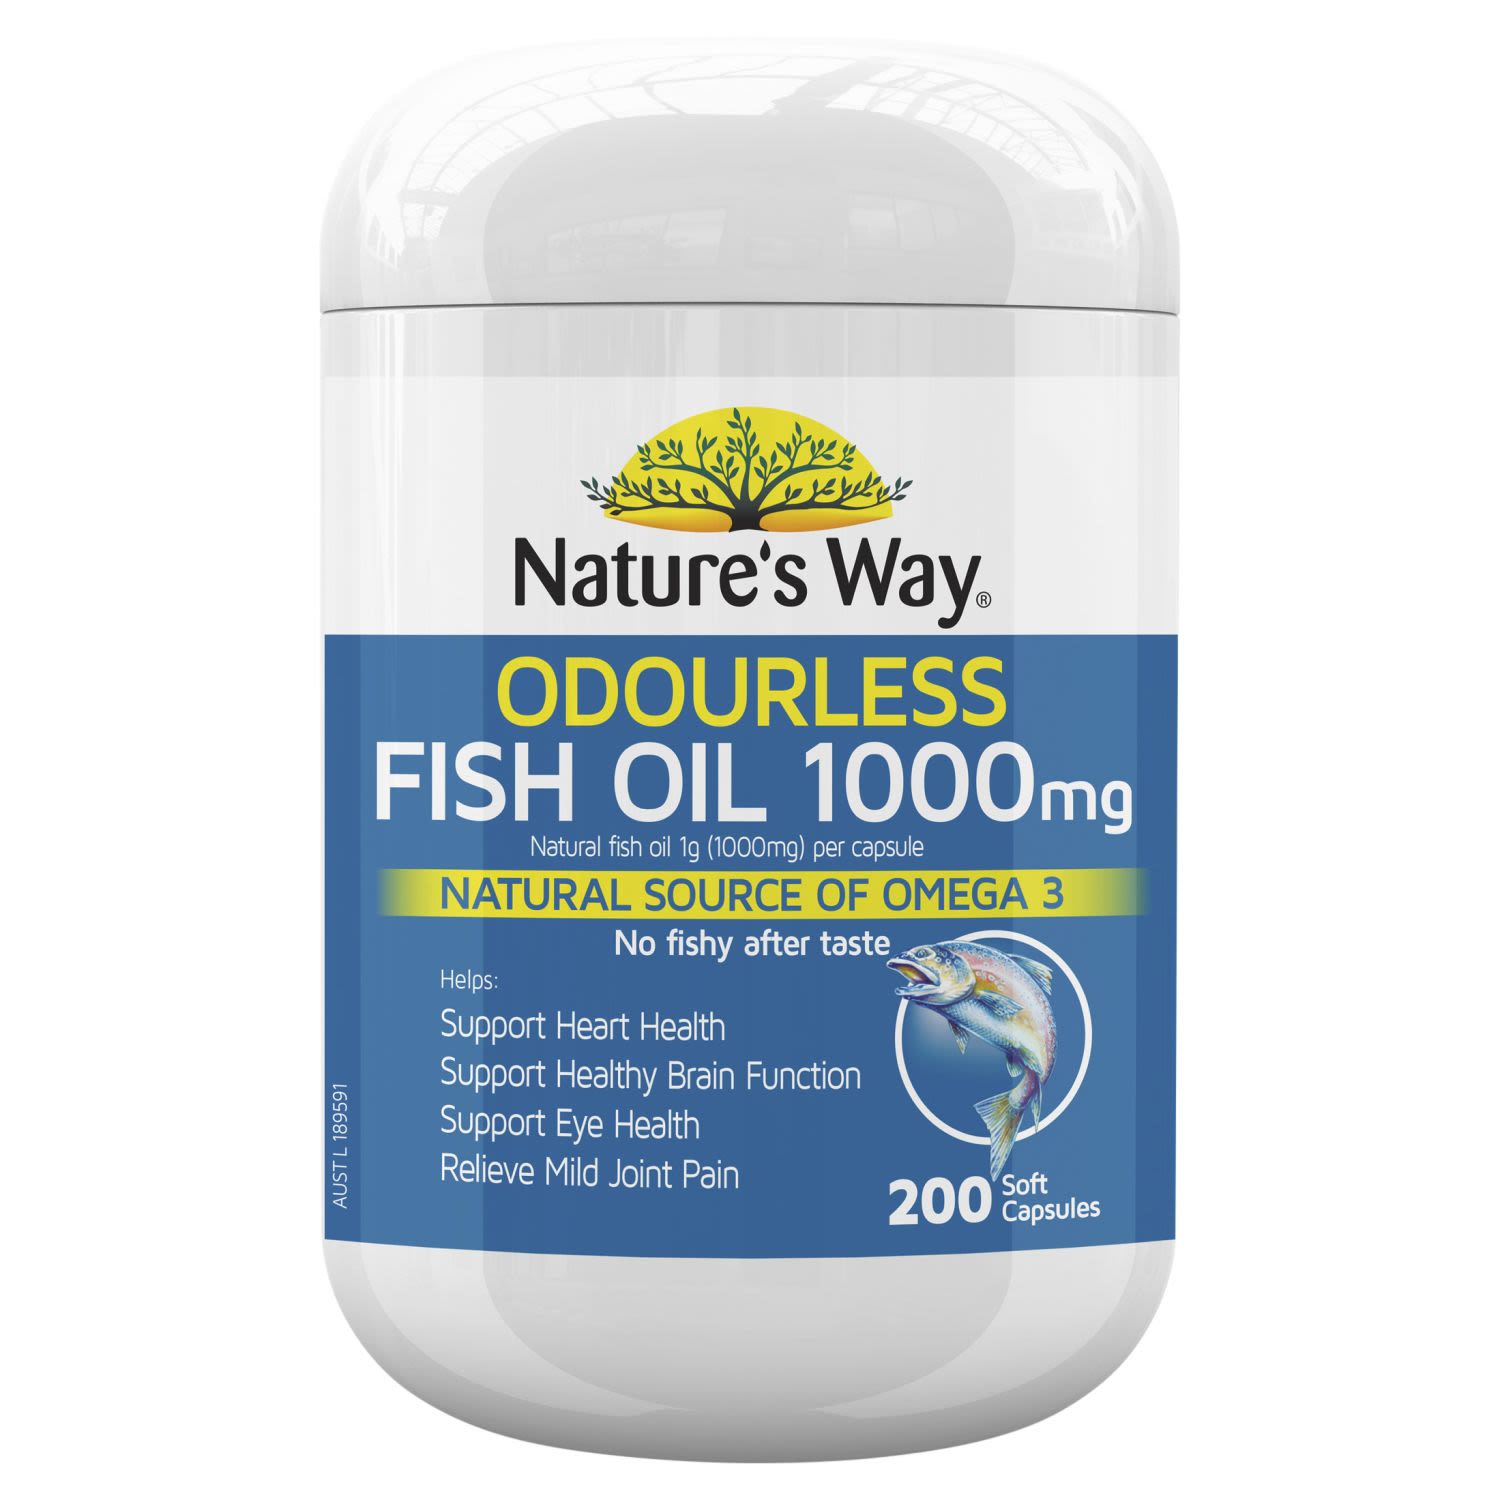 Nature's Way Odourless Fish Oil 1000mg, 200 Each